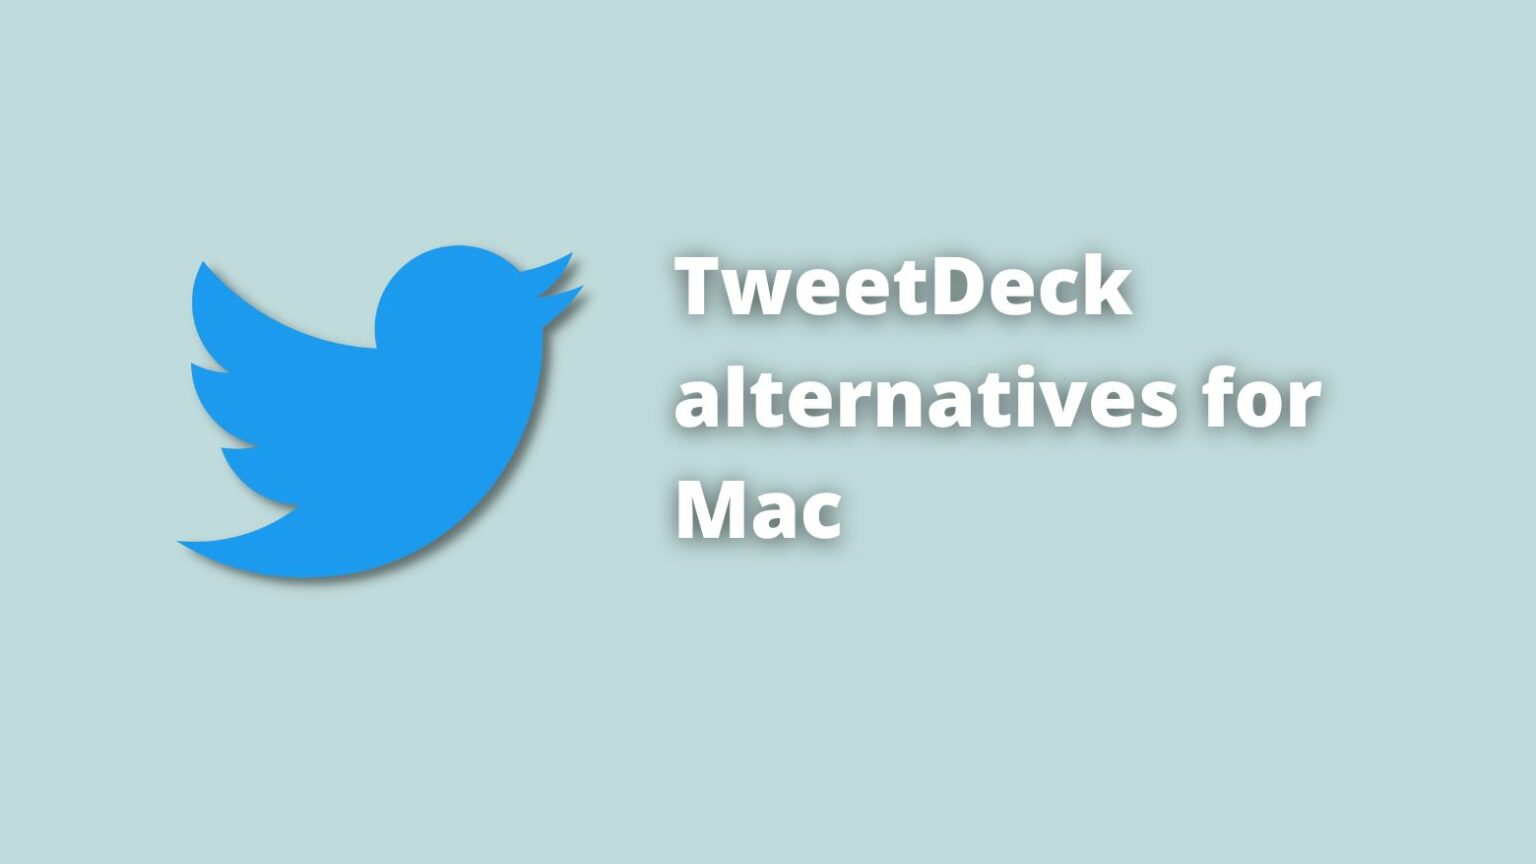 TweetDeck for Mac alternatives worth trying out